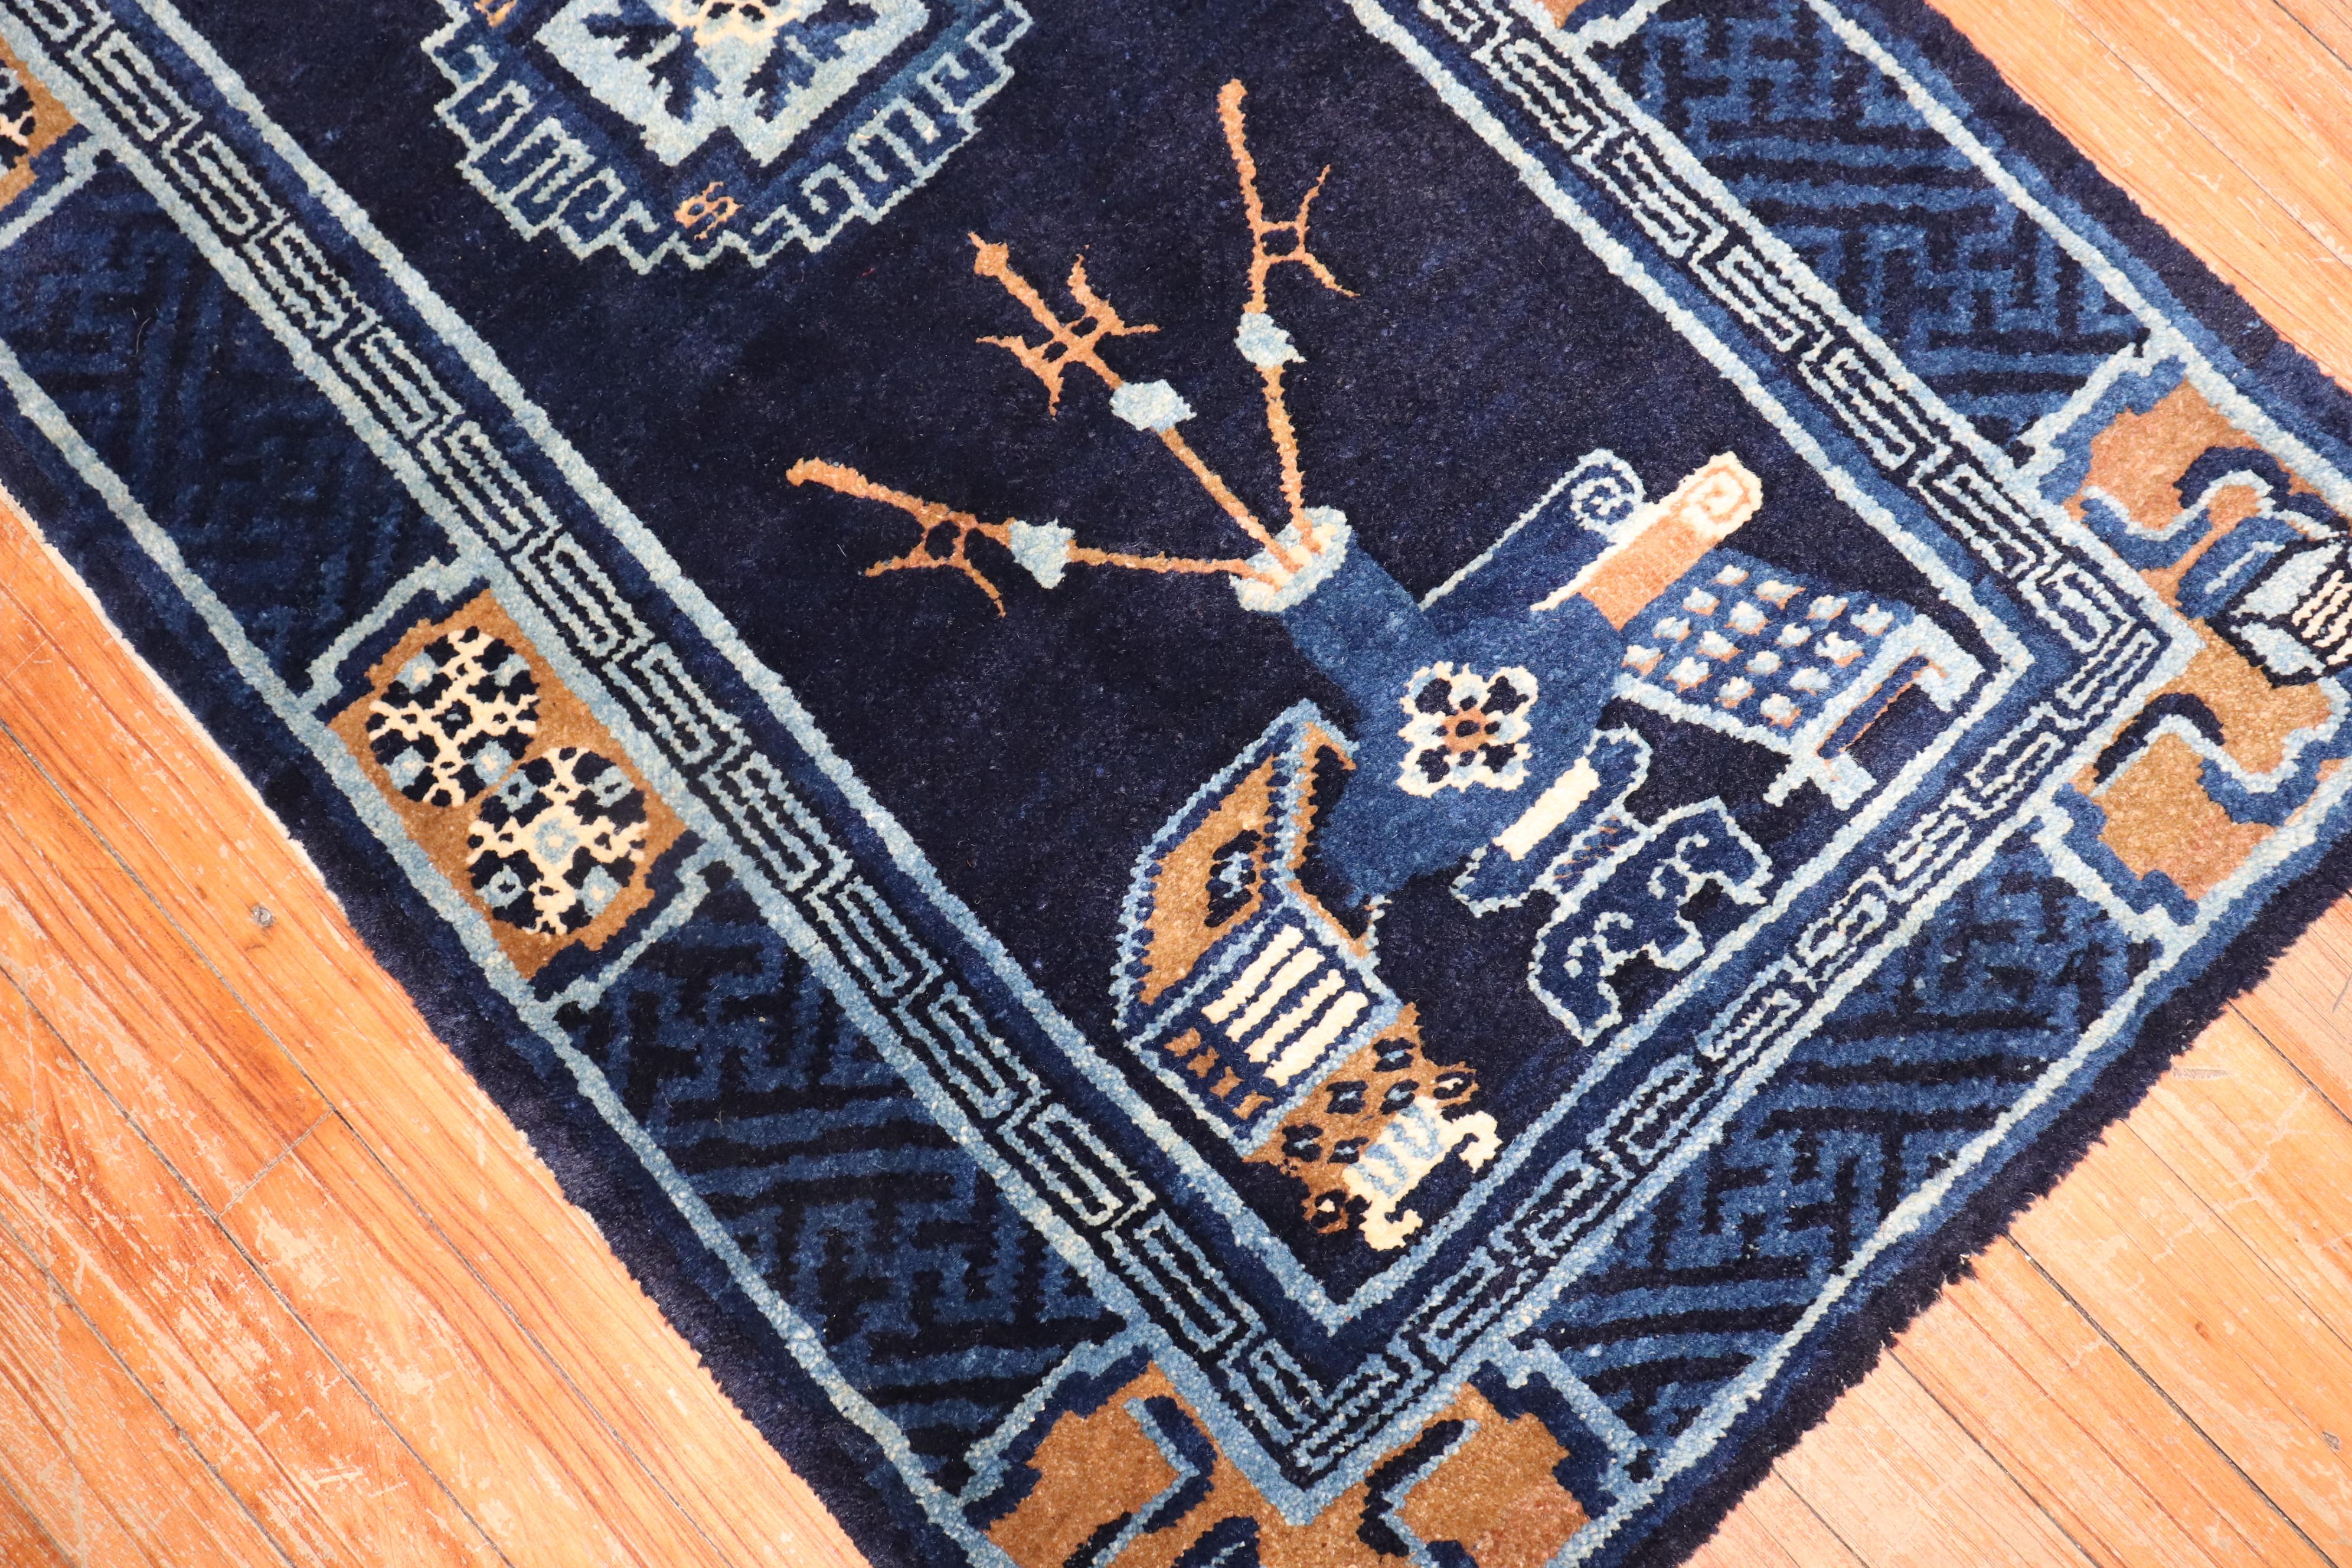 Scatter-size Chinese Peking rug in blue from the 2nd quarter of the 20th century.

Measures: 2'2